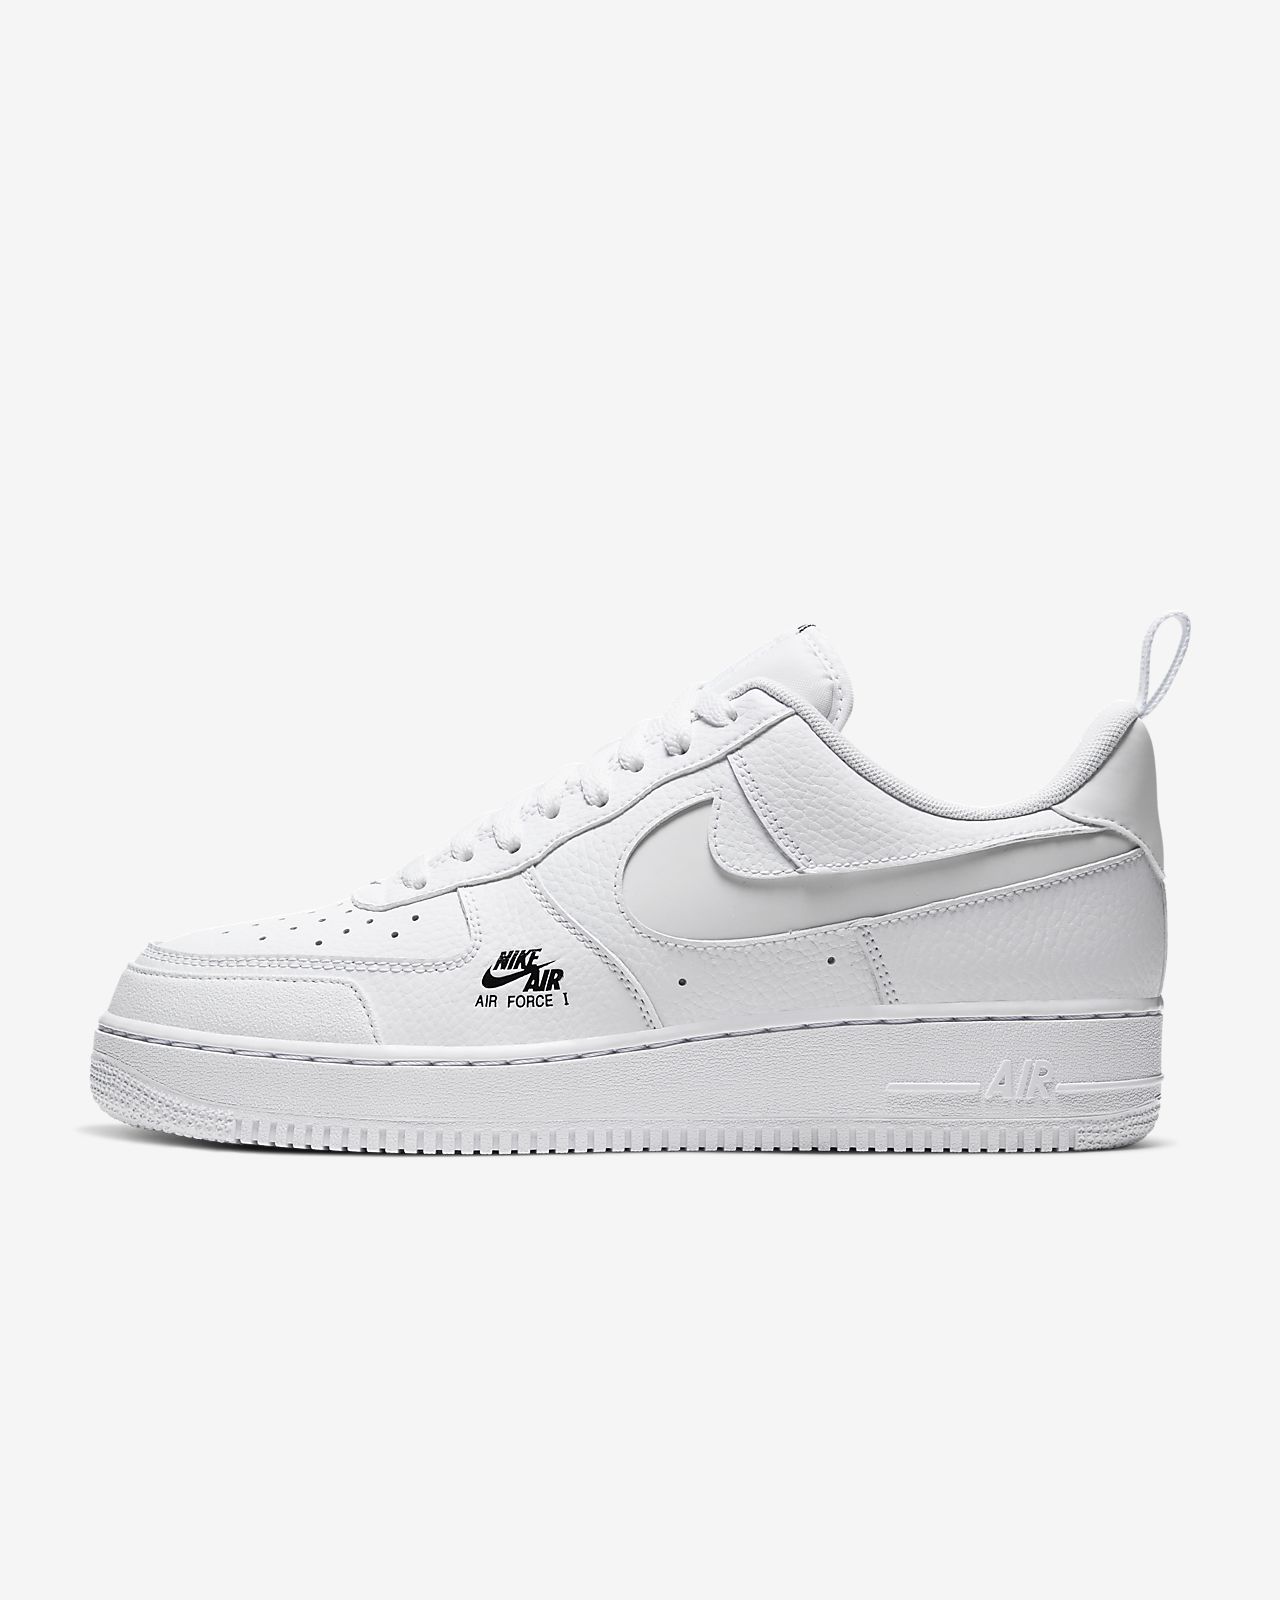 new air force ones lv8